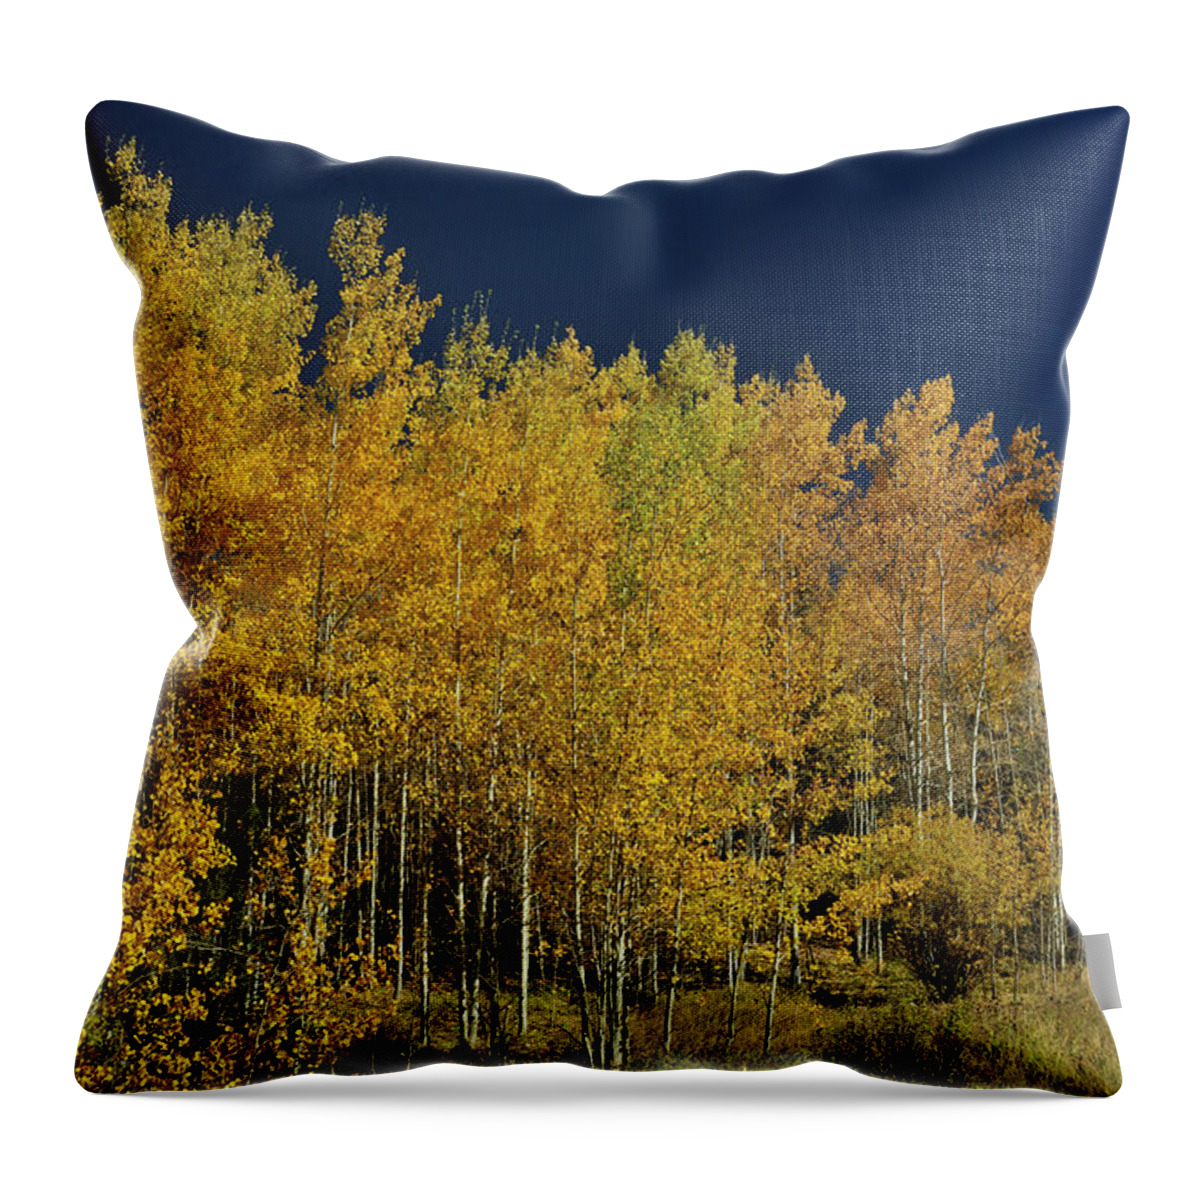 Landscape Throw Pillow featuring the photograph Young Aspen Family by Ron Cline